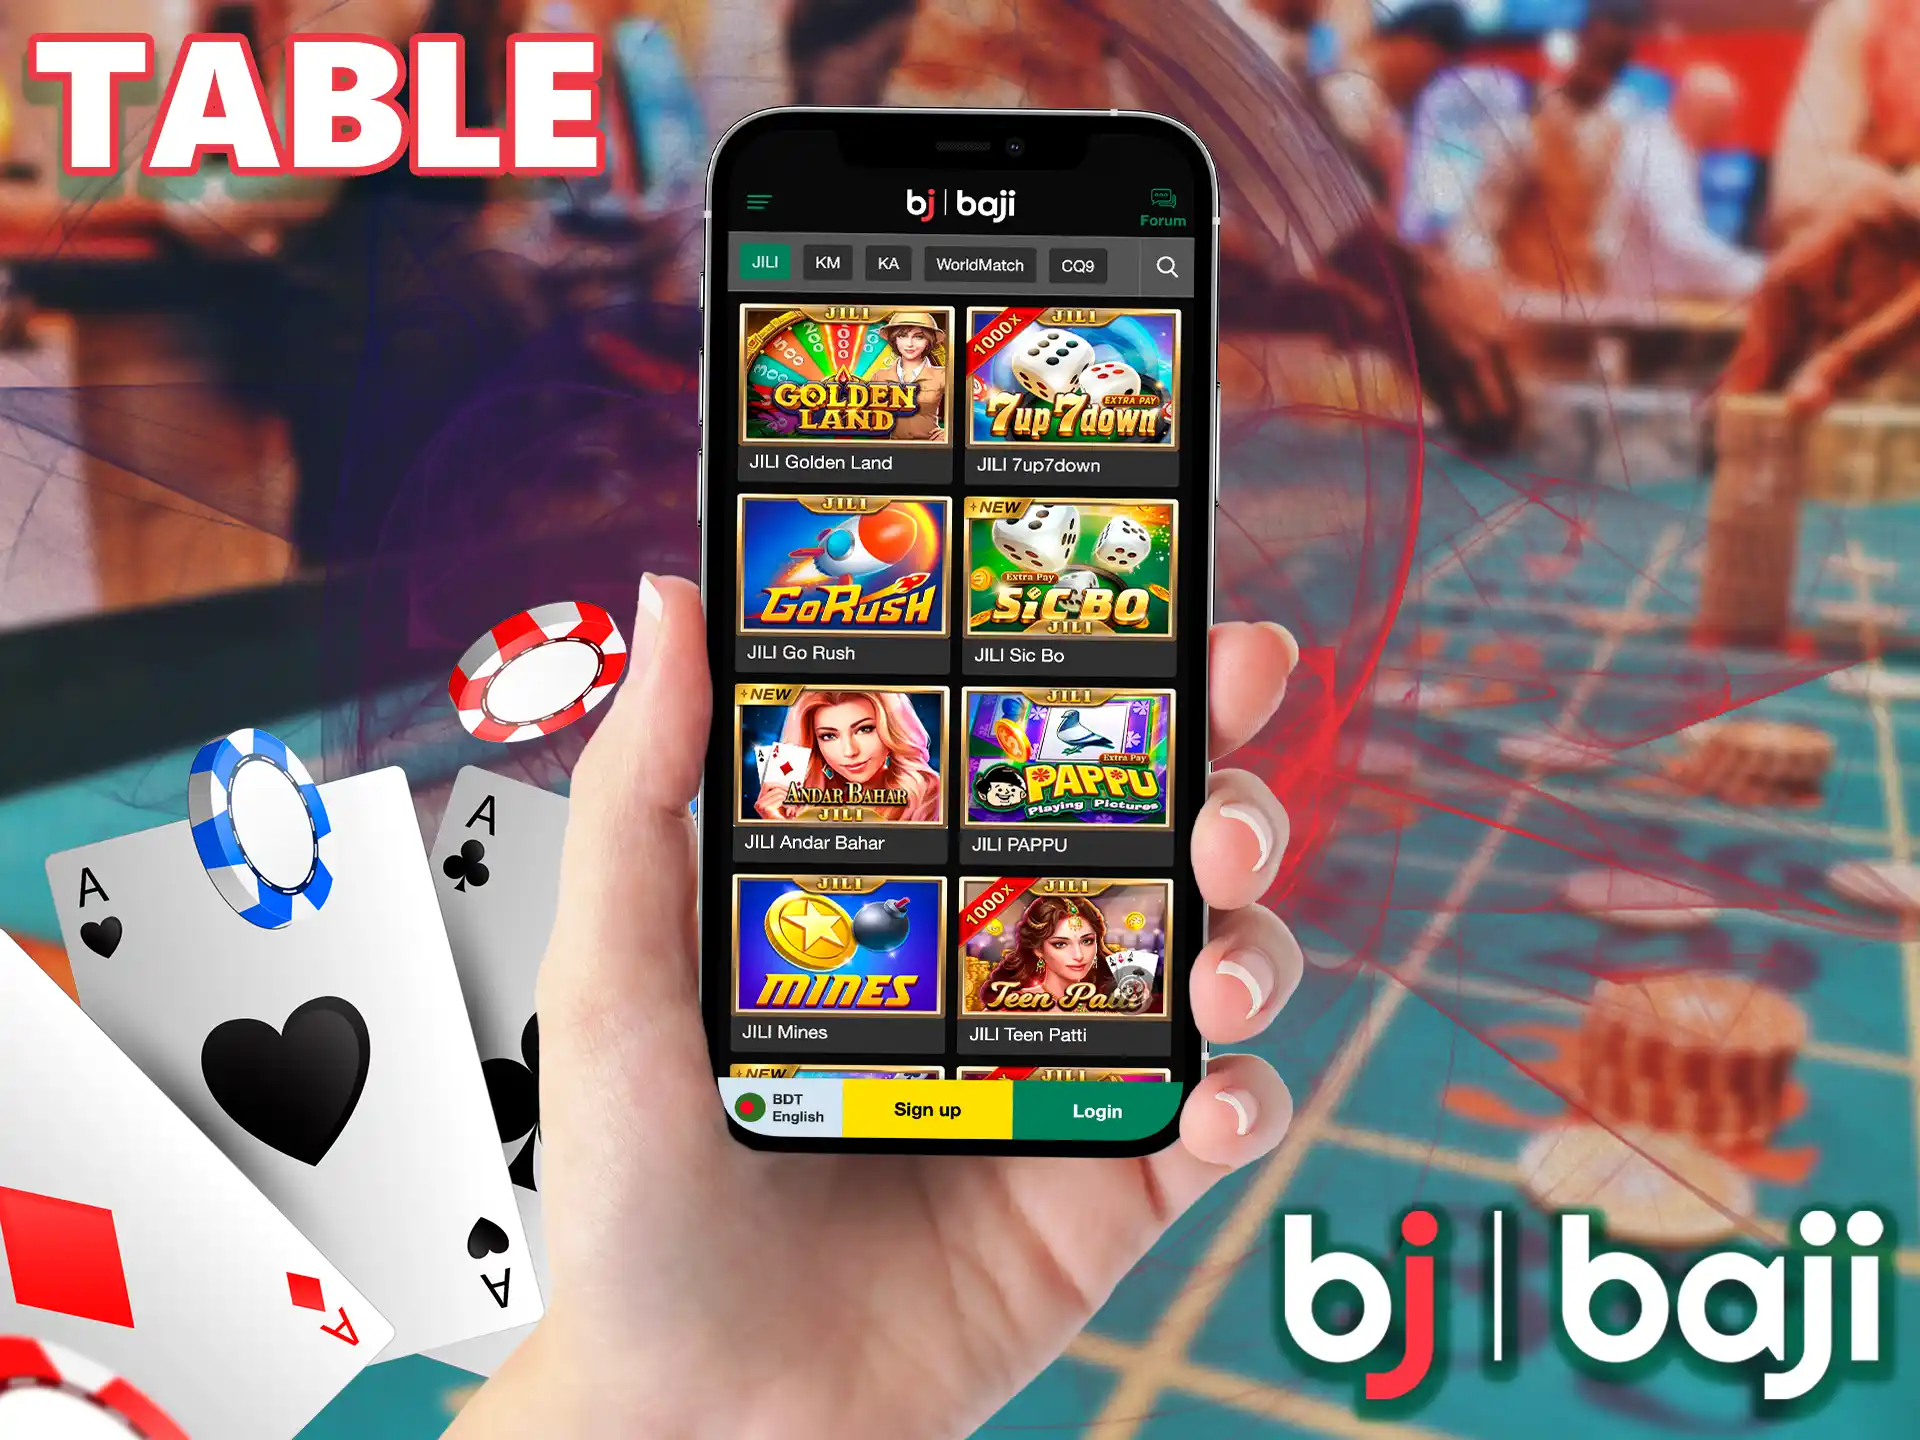 Dive headfirst into the kind of gambling that takes place on the table in the Baji app.